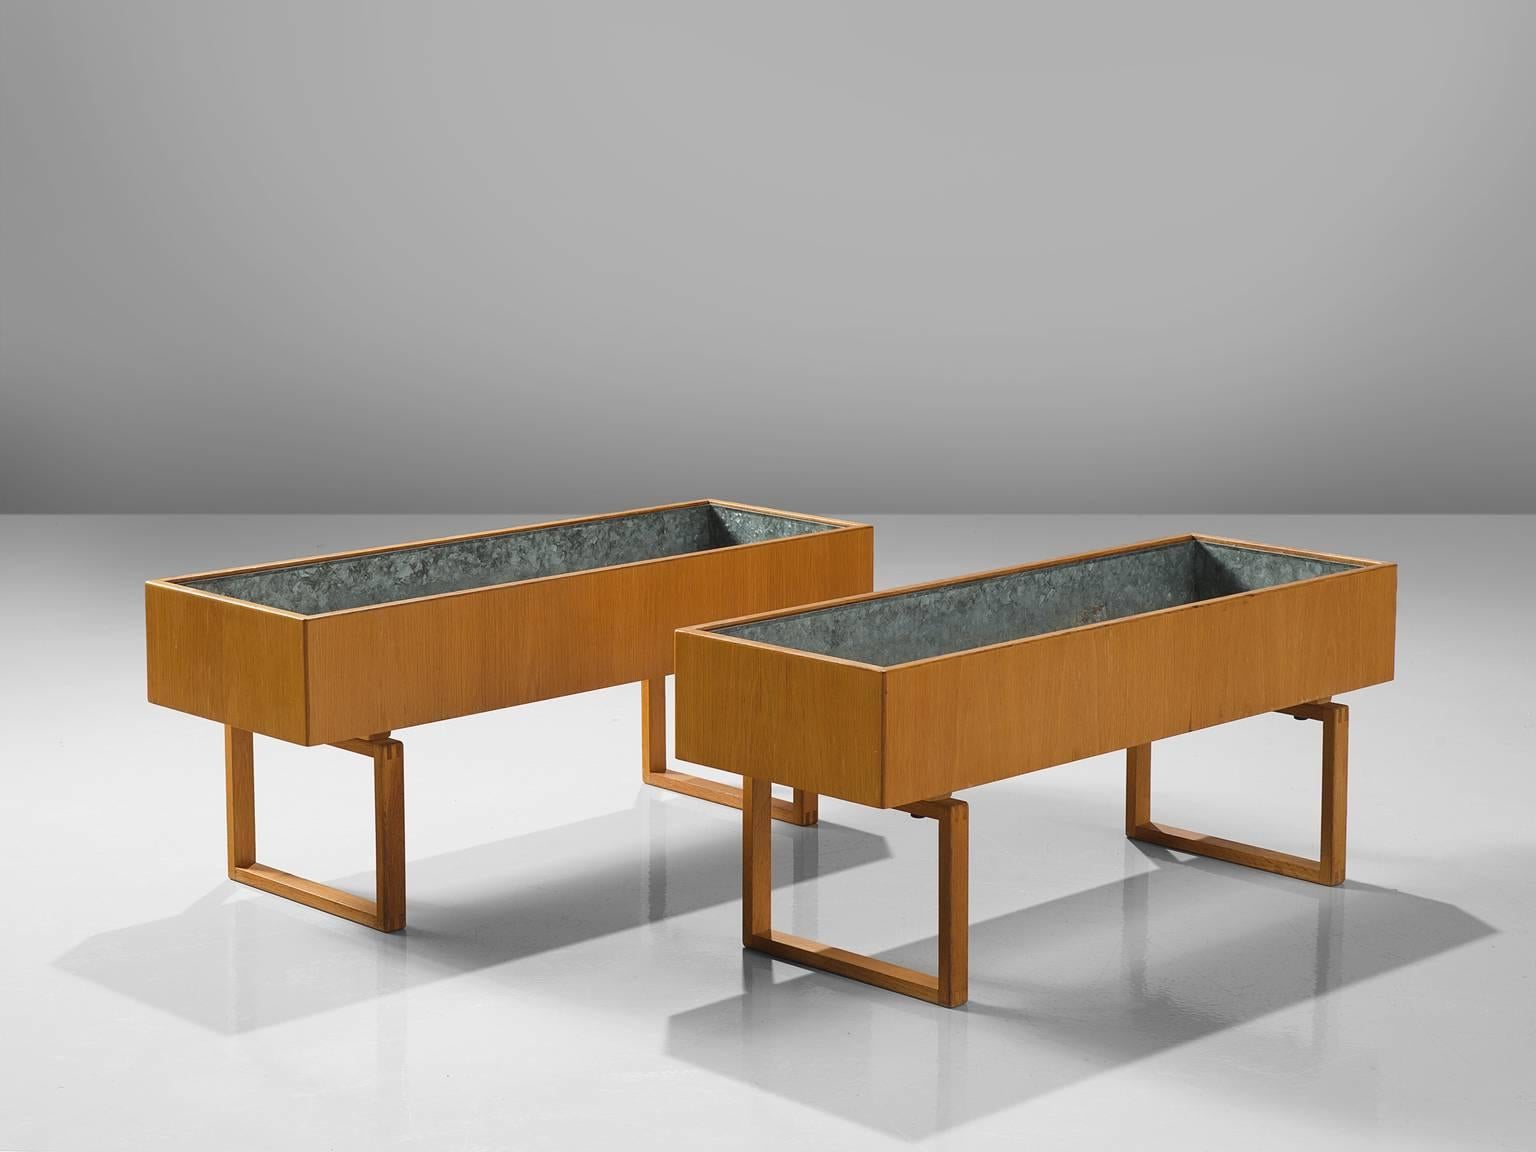 Kai Kristiansen, planters, oak and steel, Denmark, 1960s.

These simplistic Danish oak planters are designed by Kai Kristiansen. The square holder feature two sledge feet and a simplistic and modest oak rectangular box. They are beautifully